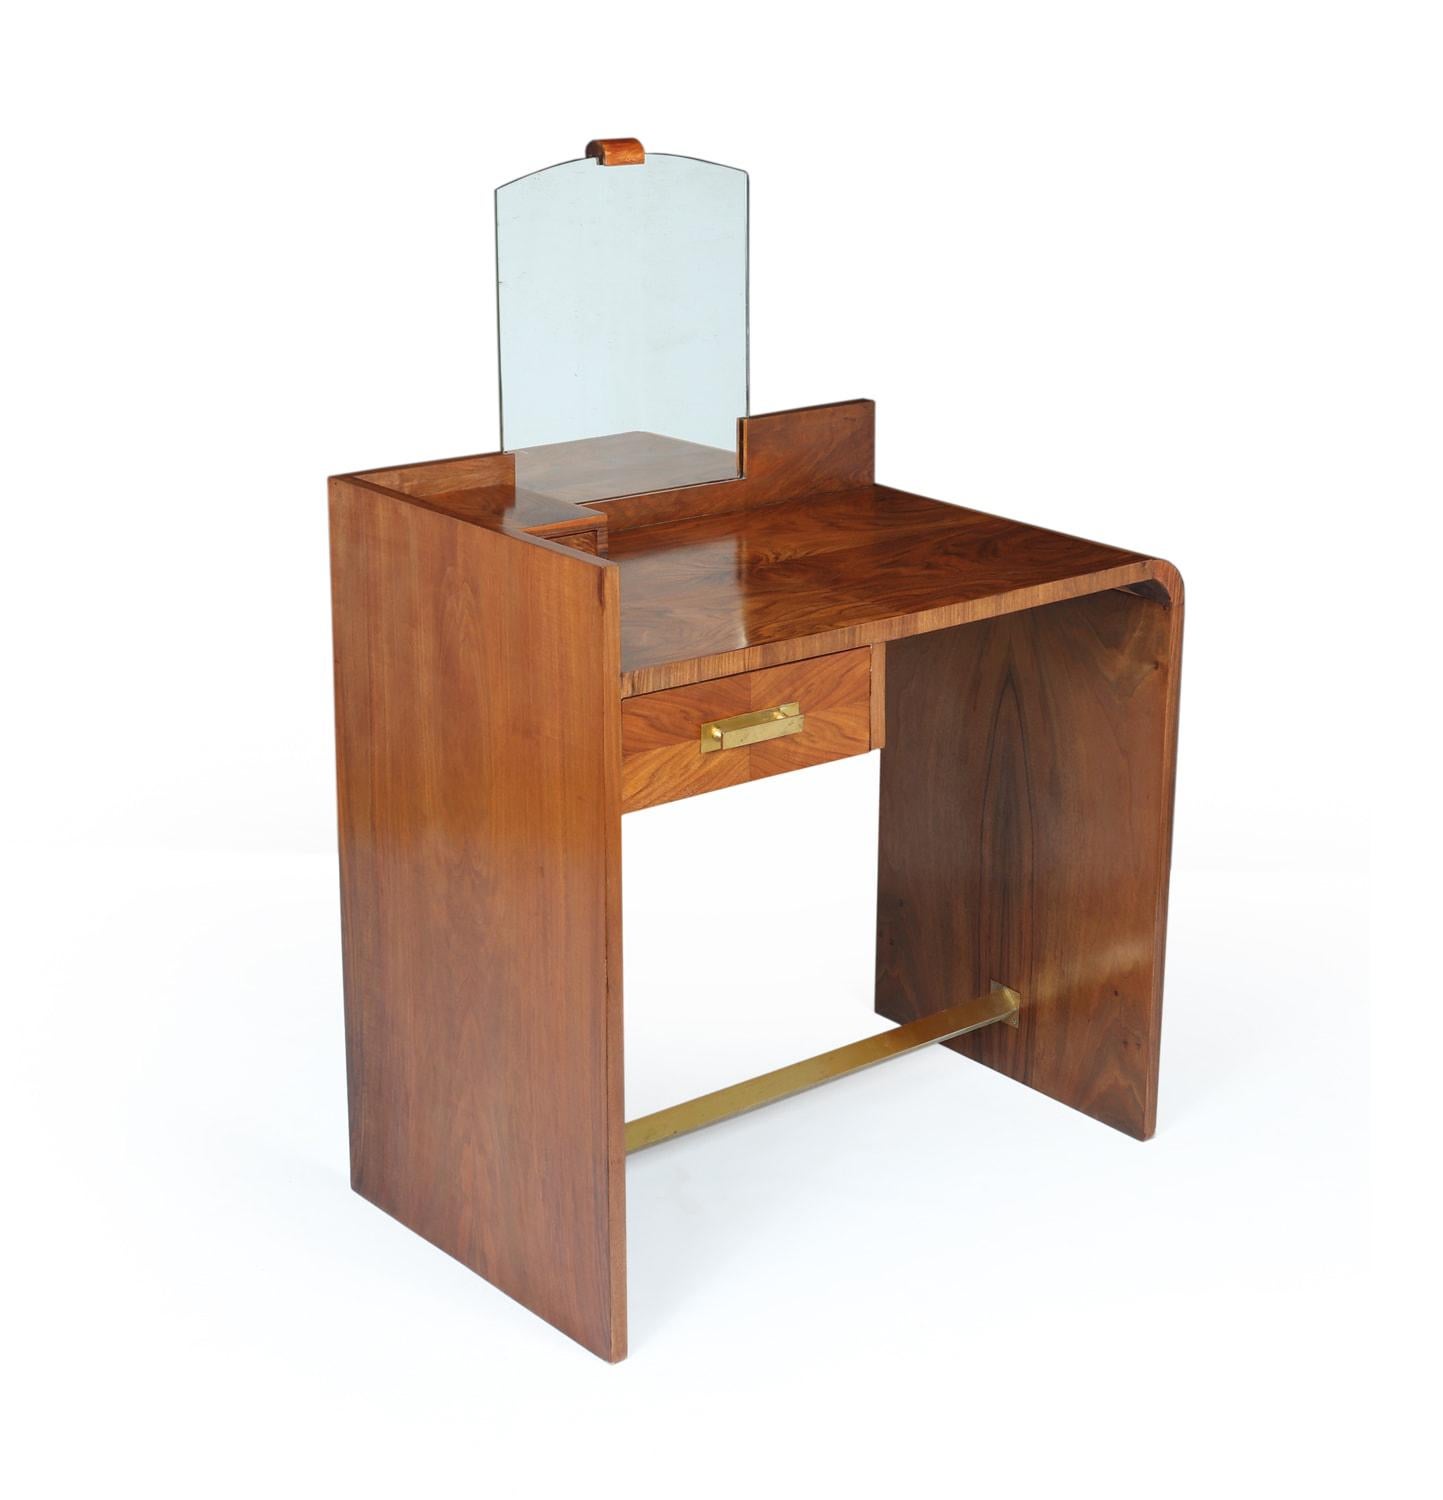 Art Deco Walnut Dressing Table
A French art deco dressing table with two drawers and original mirror and brass handles and foot bar, the dressing table has bee fully polished and is in very good condition throughout

Age: 1930

Style: Art